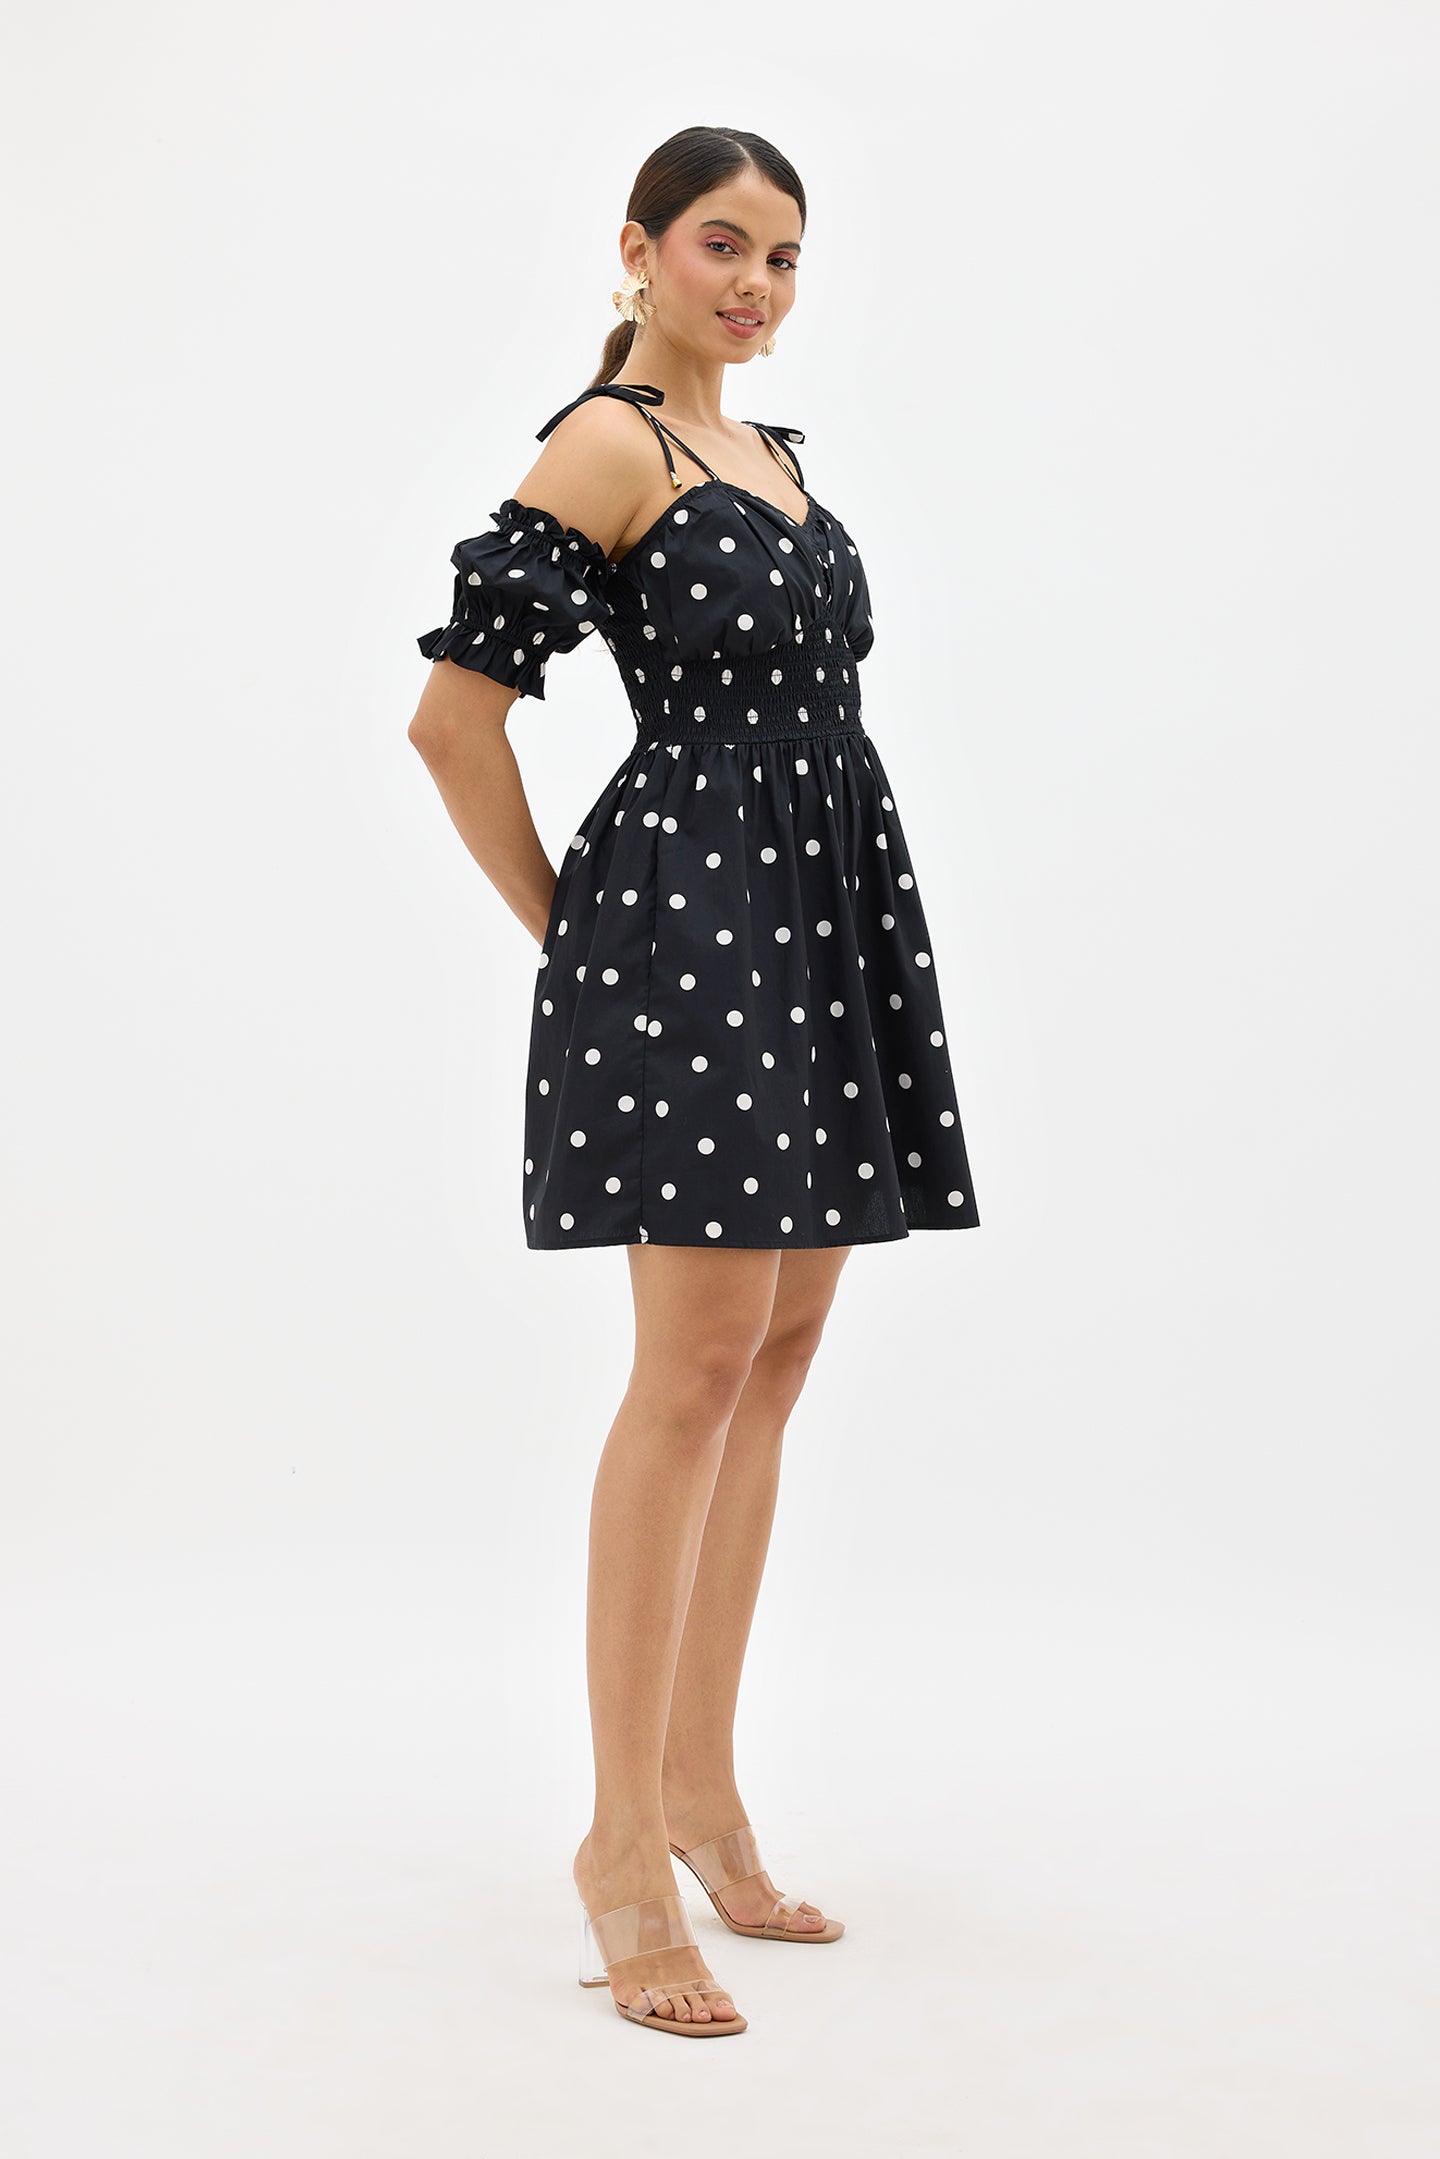 Pixie|Comfy polka dress with detachable sleeves